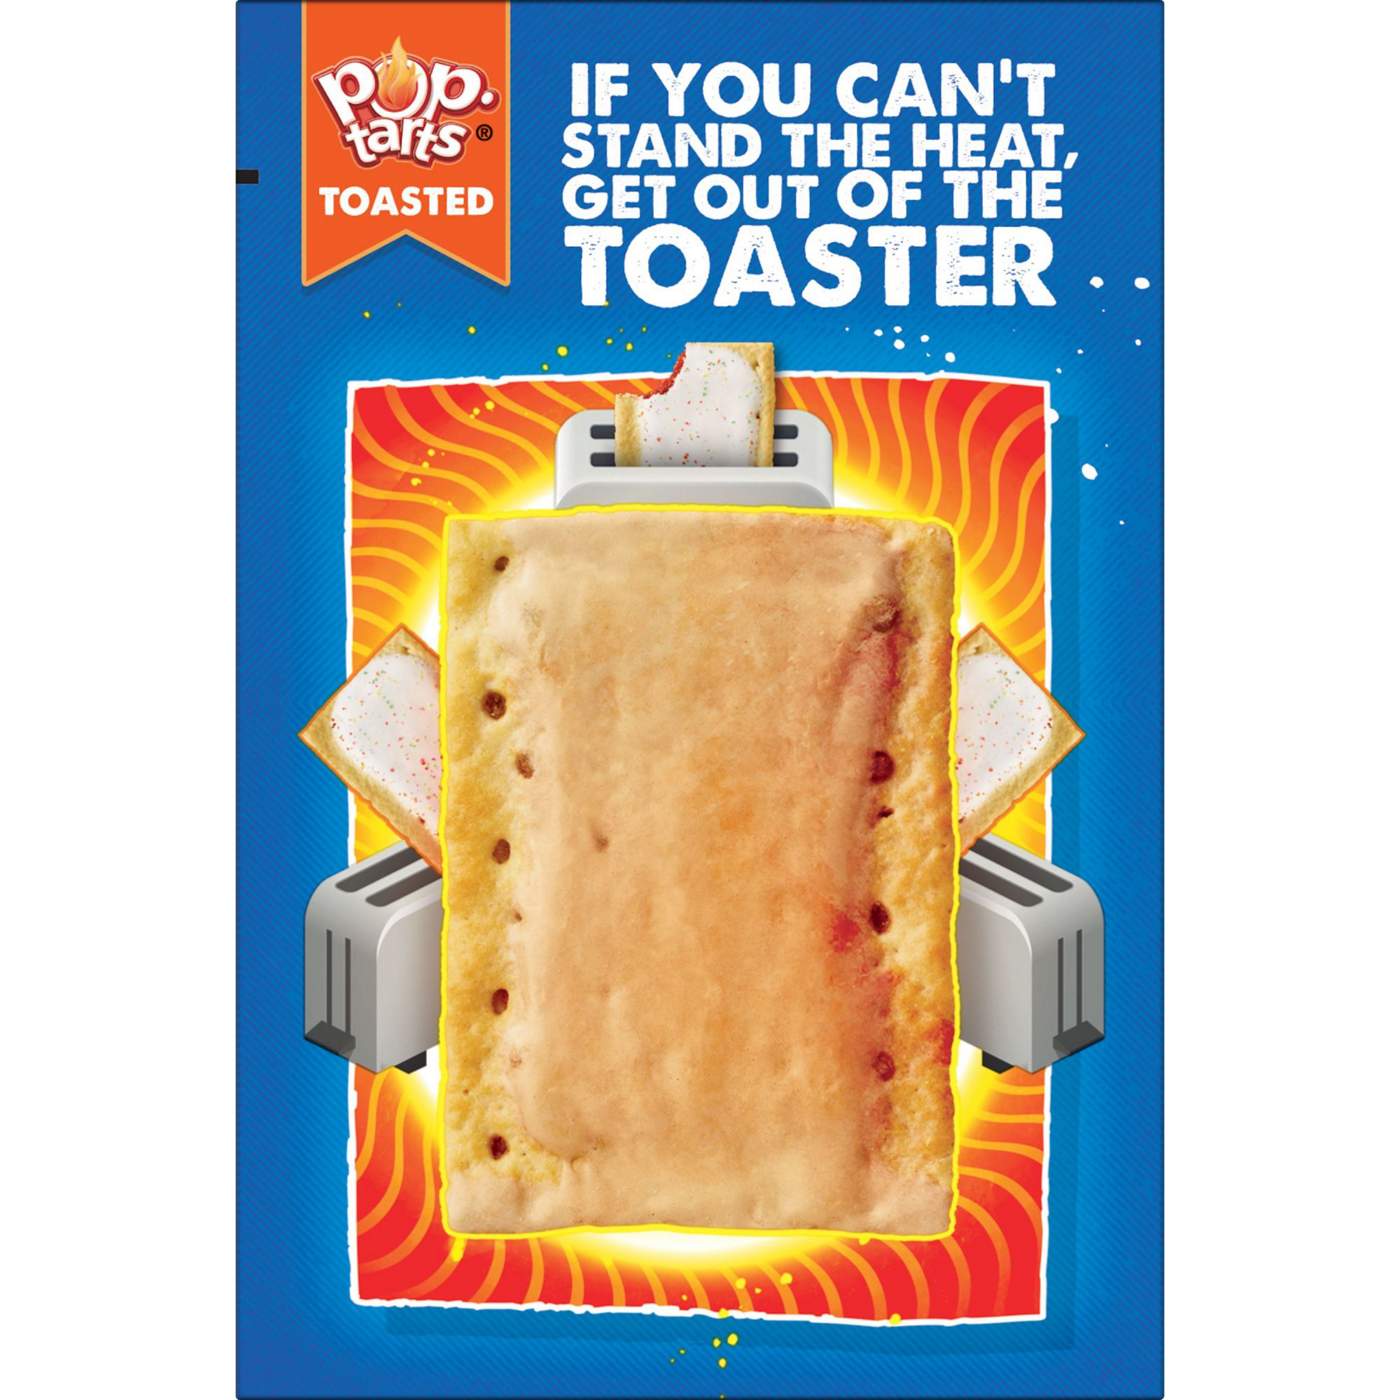 Pop-Tarts Frosted Brown Sugar Cinnamon Toaster Pastries; image 4 of 12